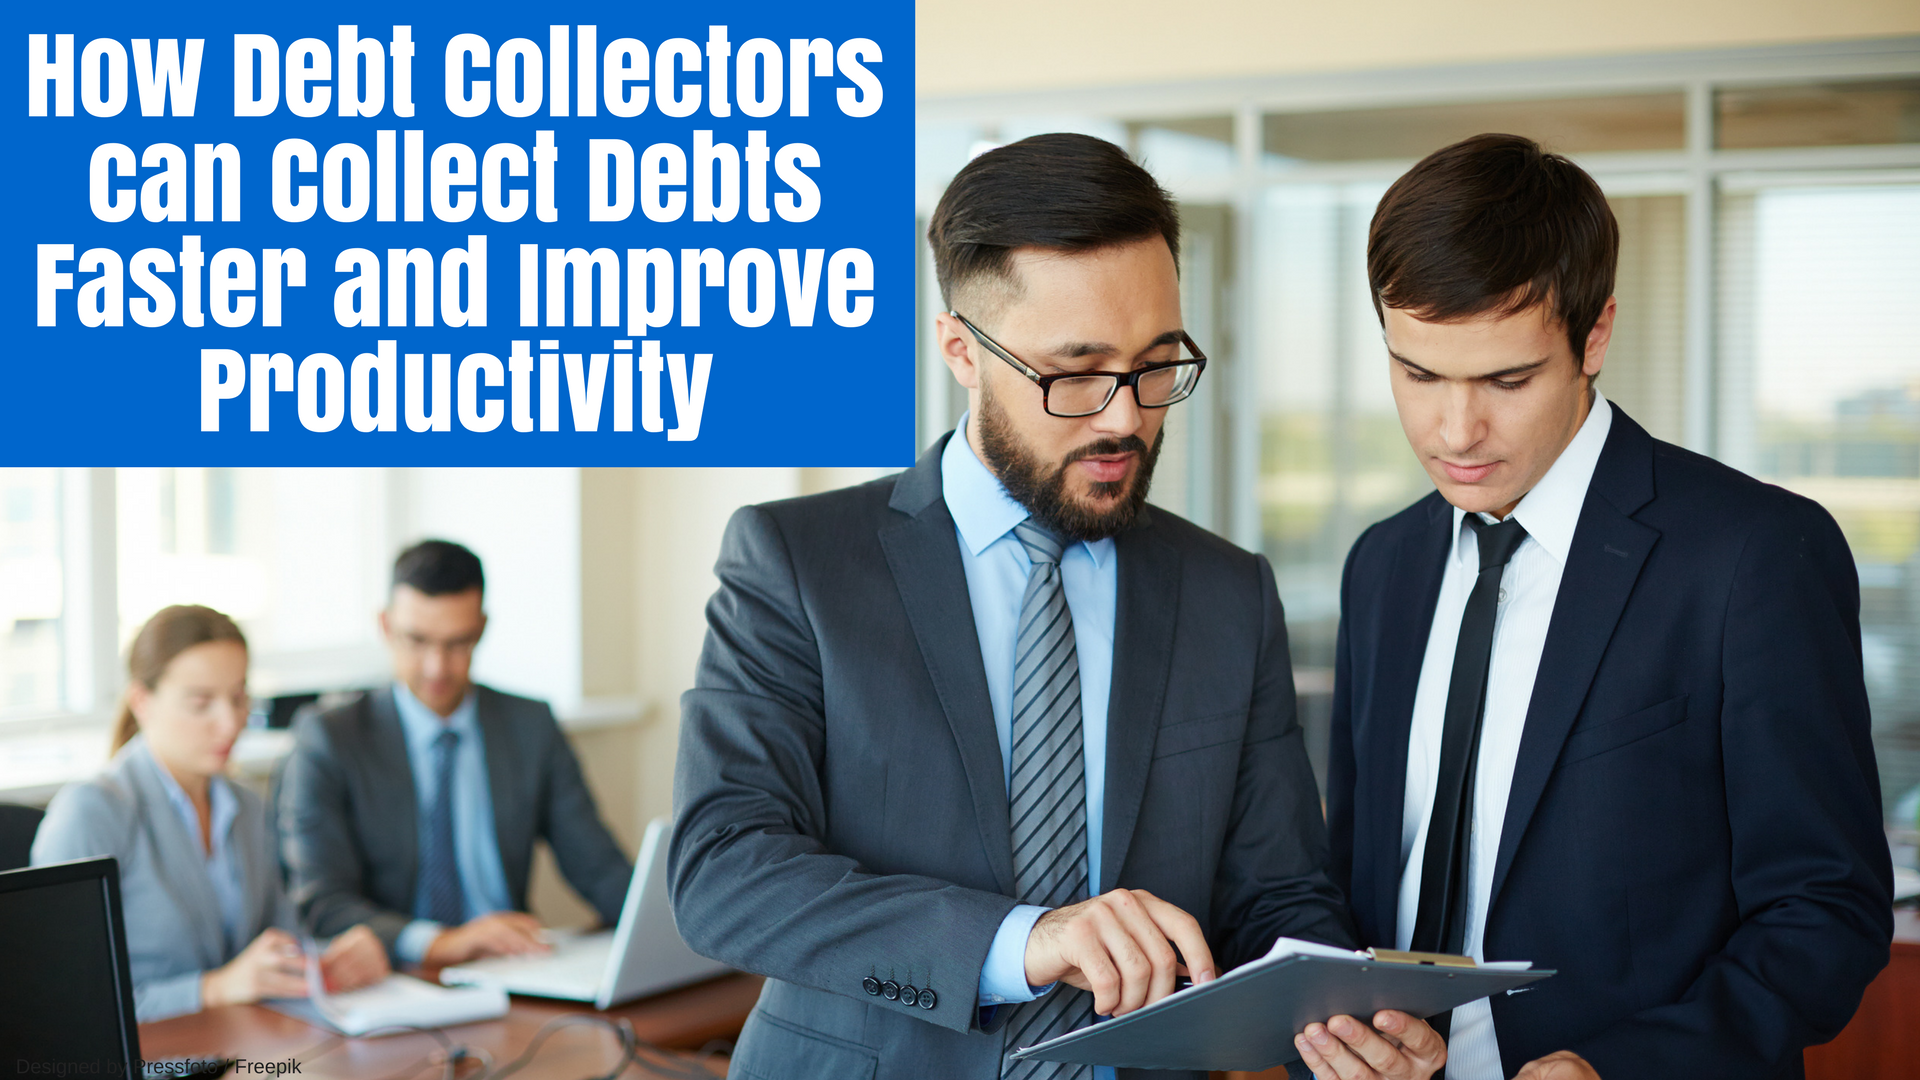 How Debt Collectors can Collect Debts Faster and Improve Productivity